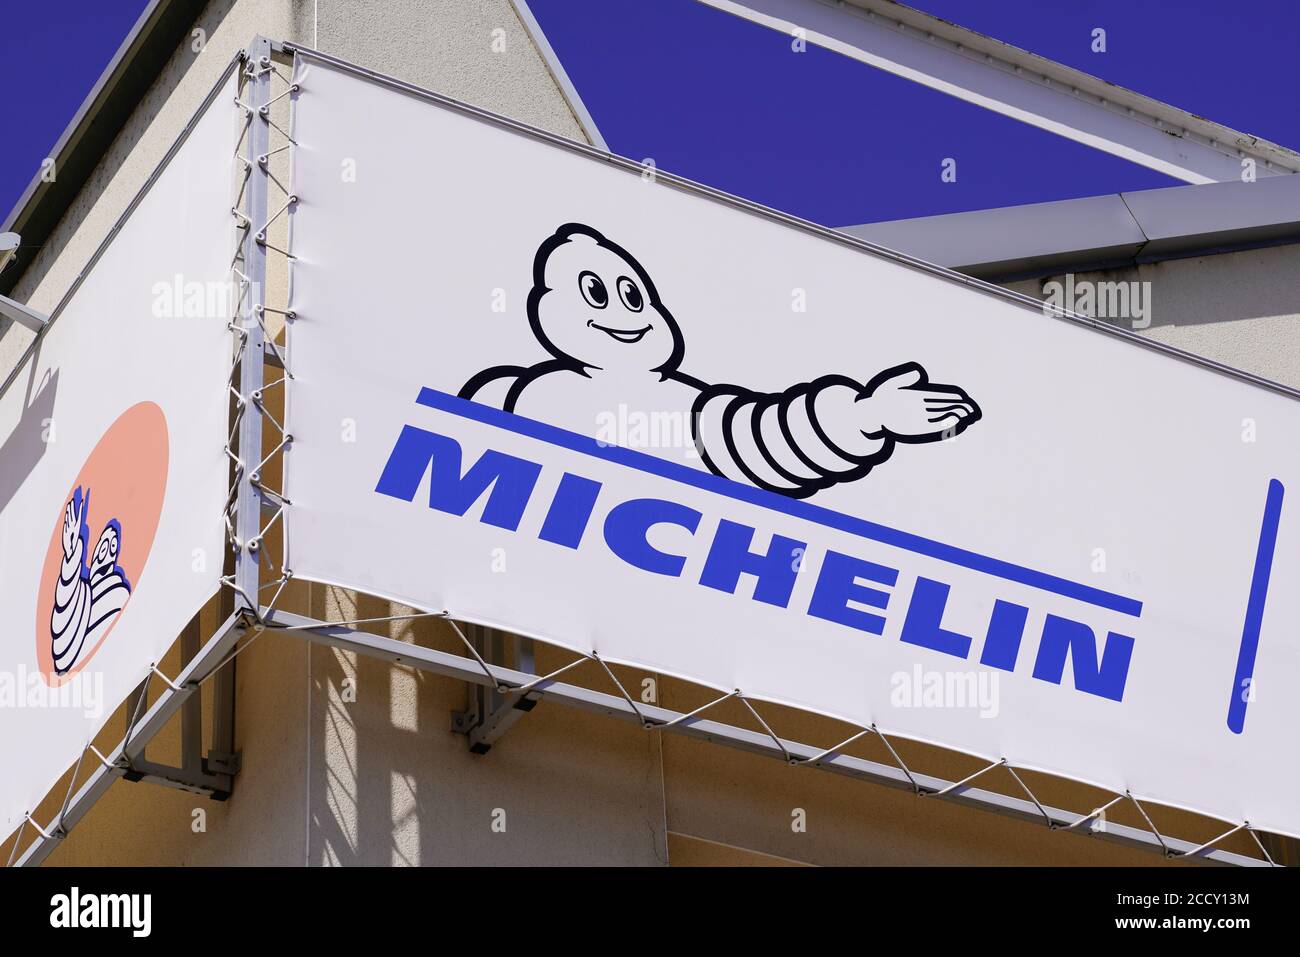 Clermont-Ferrand , Auvergne / France - 08 16 2020 : Michelin bibendum logo sign and text on french tire manufacturer based in Clermont-Ferrand in Fran Stock Photo